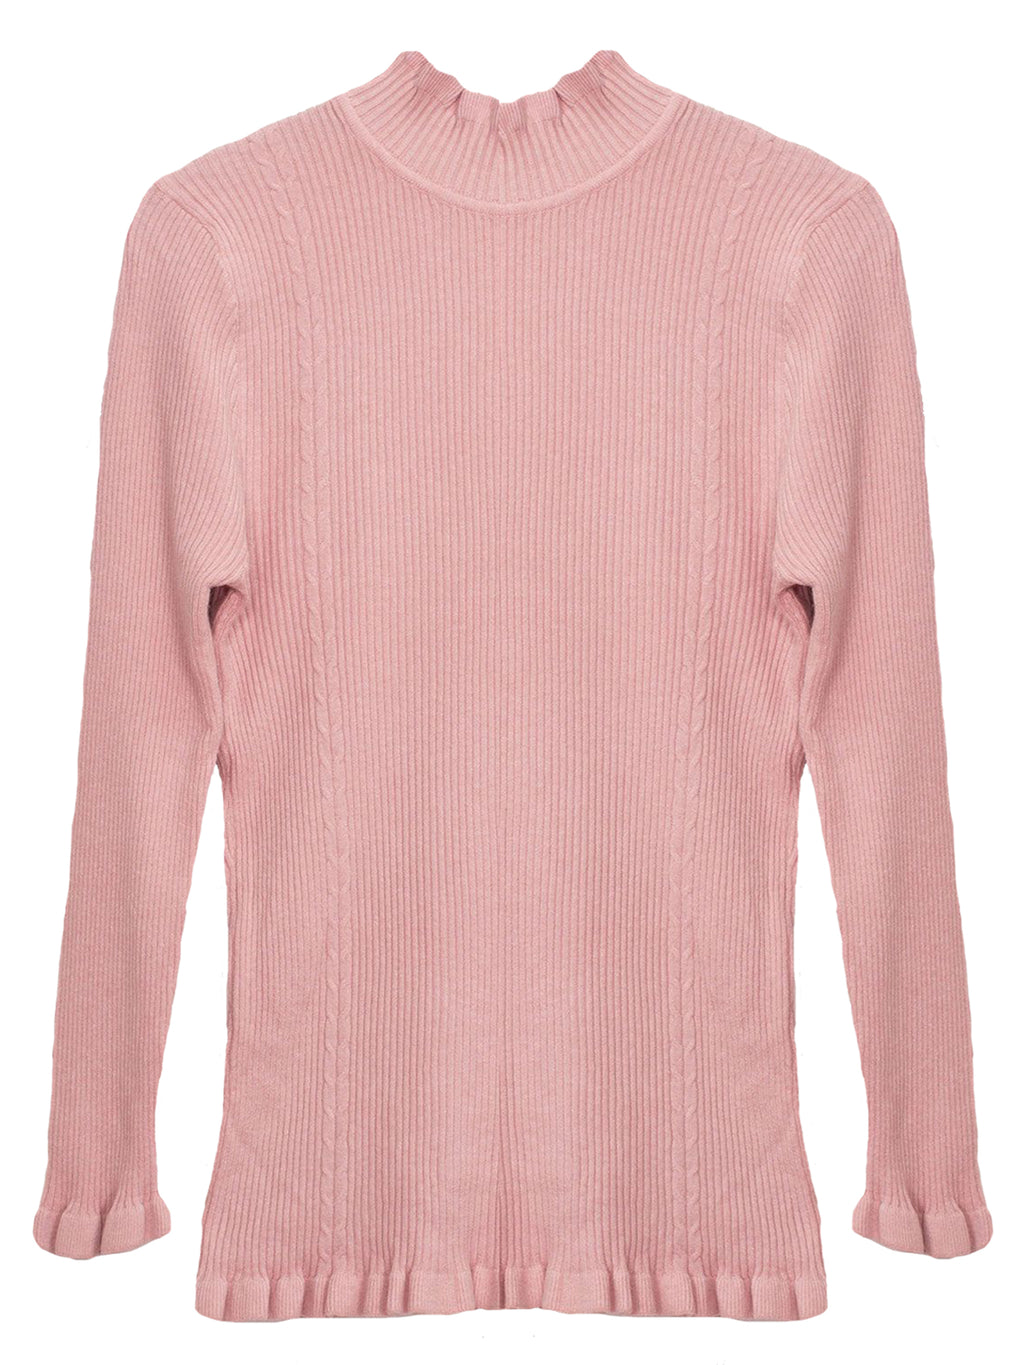 Pale Pink Ribbed Knit Sweater With Ruffle Trim